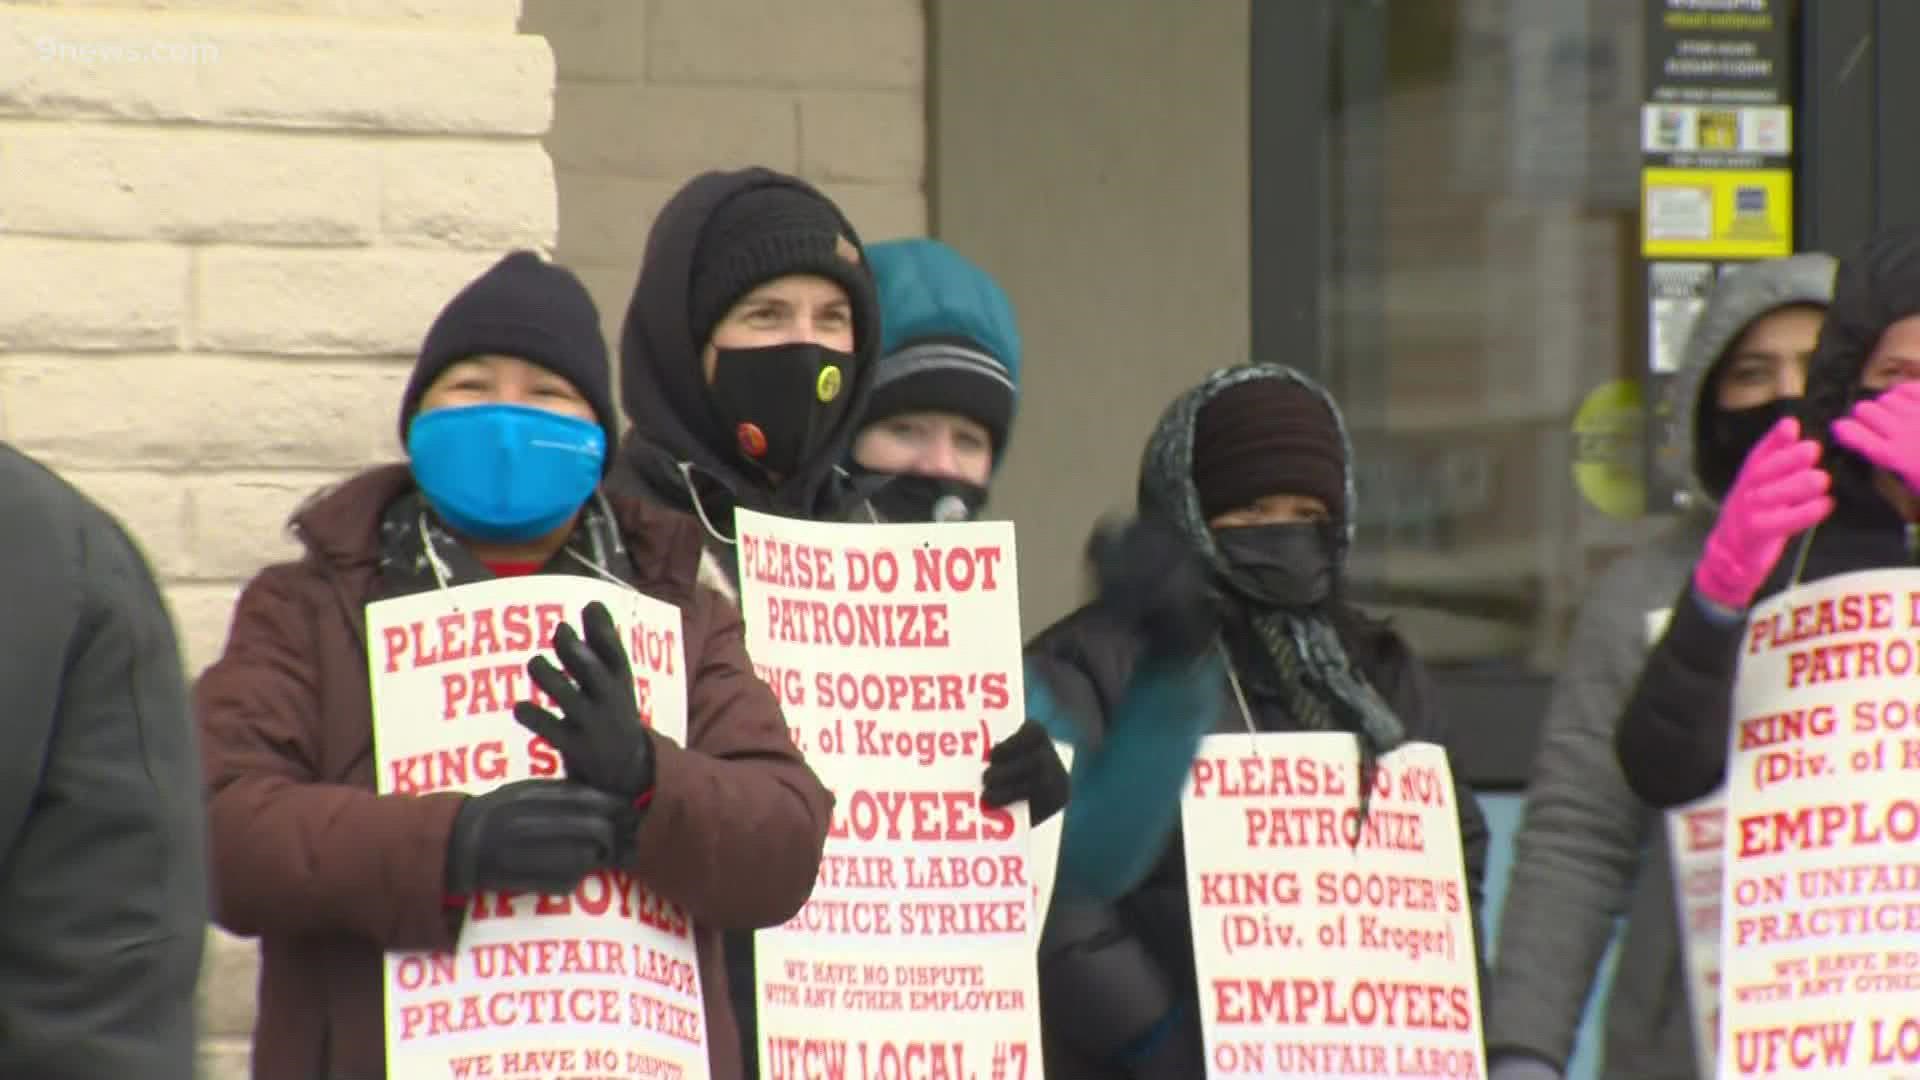 Both sides are set to meet at 11 a.m. Friday as workers remain on the picket lines.